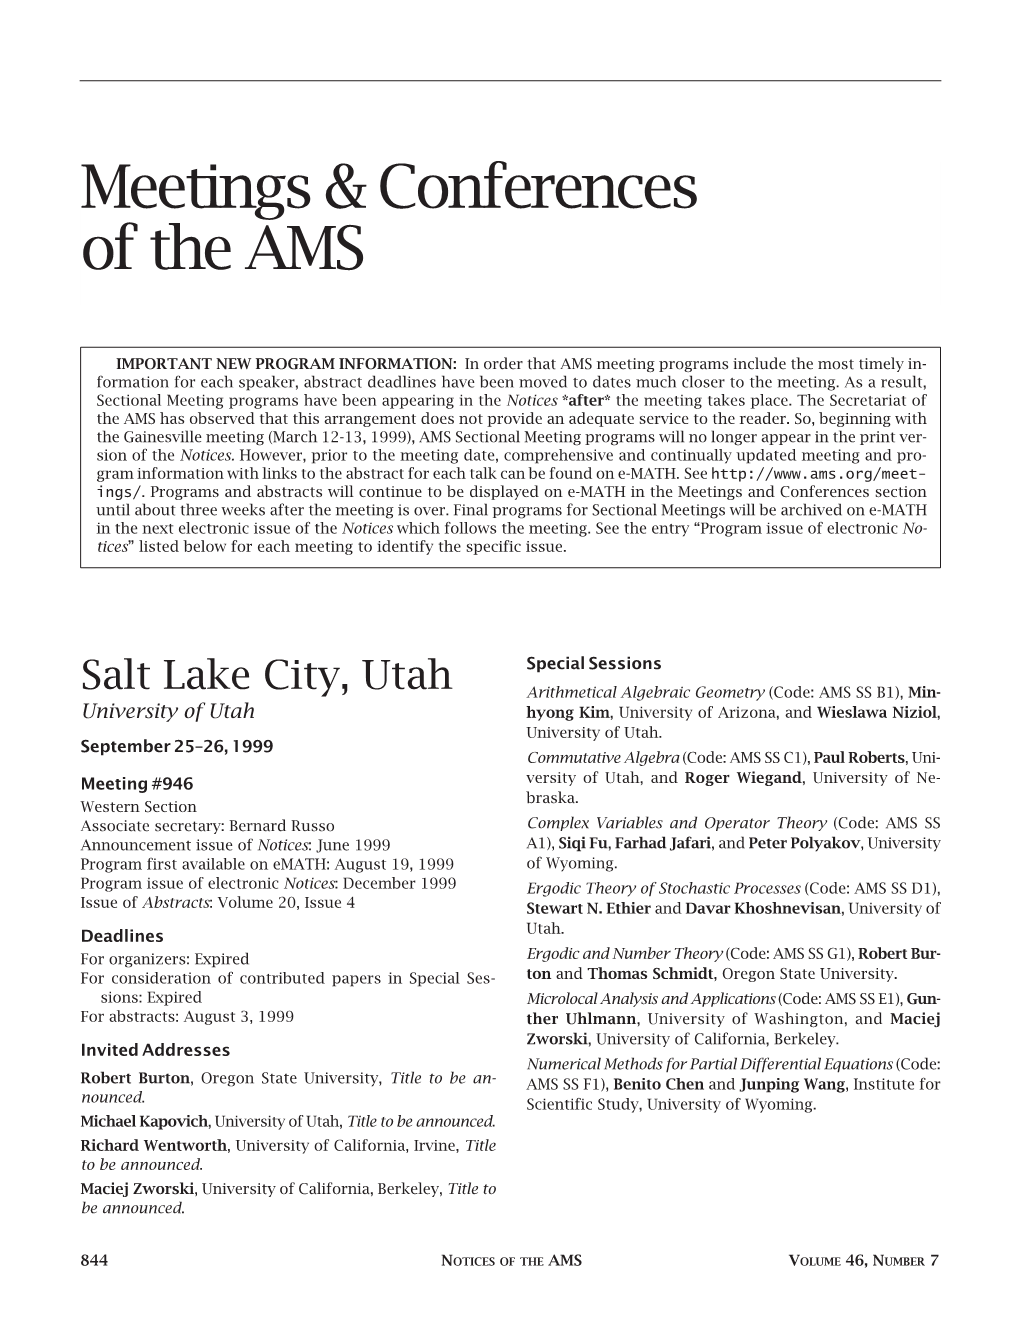 Meetings & Conferences of the AMS, Volume 46, Number 7